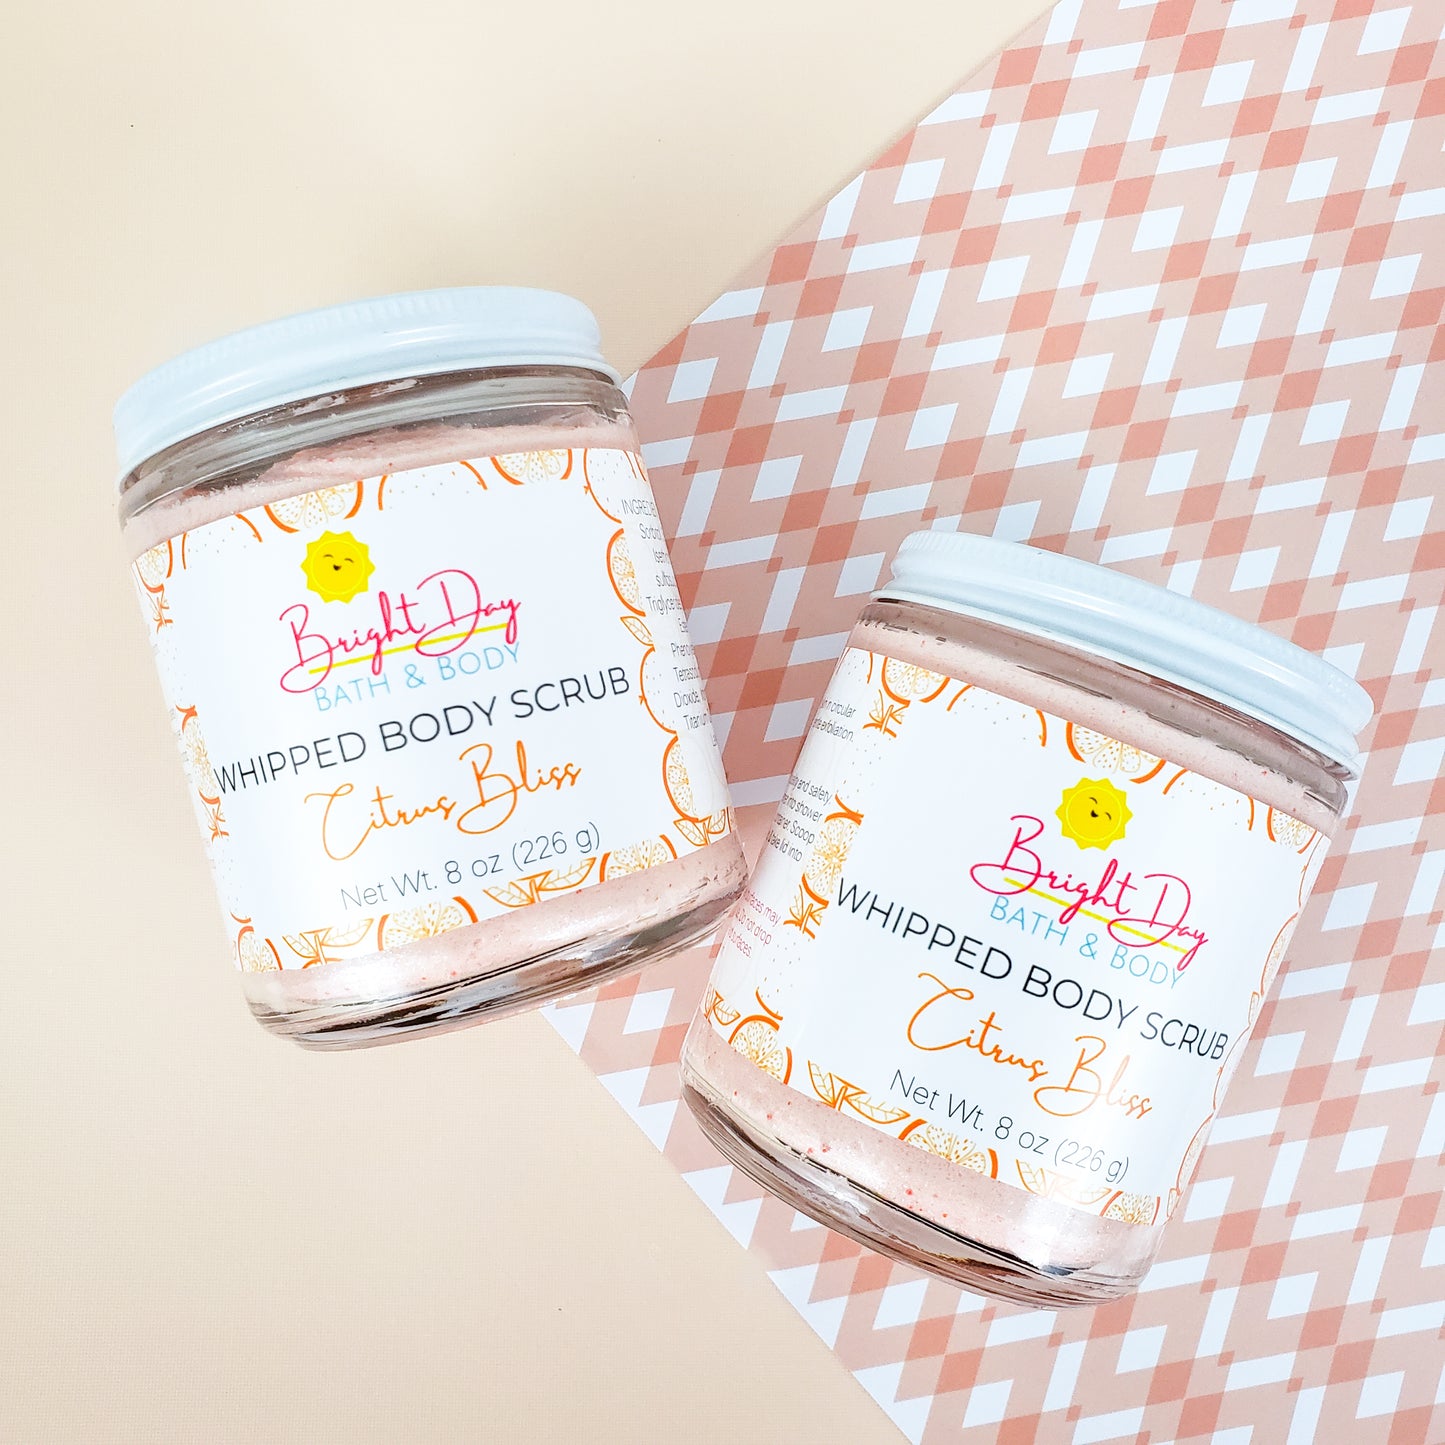 Two Citrus Bliss Body Scrubs on an orange patterned background